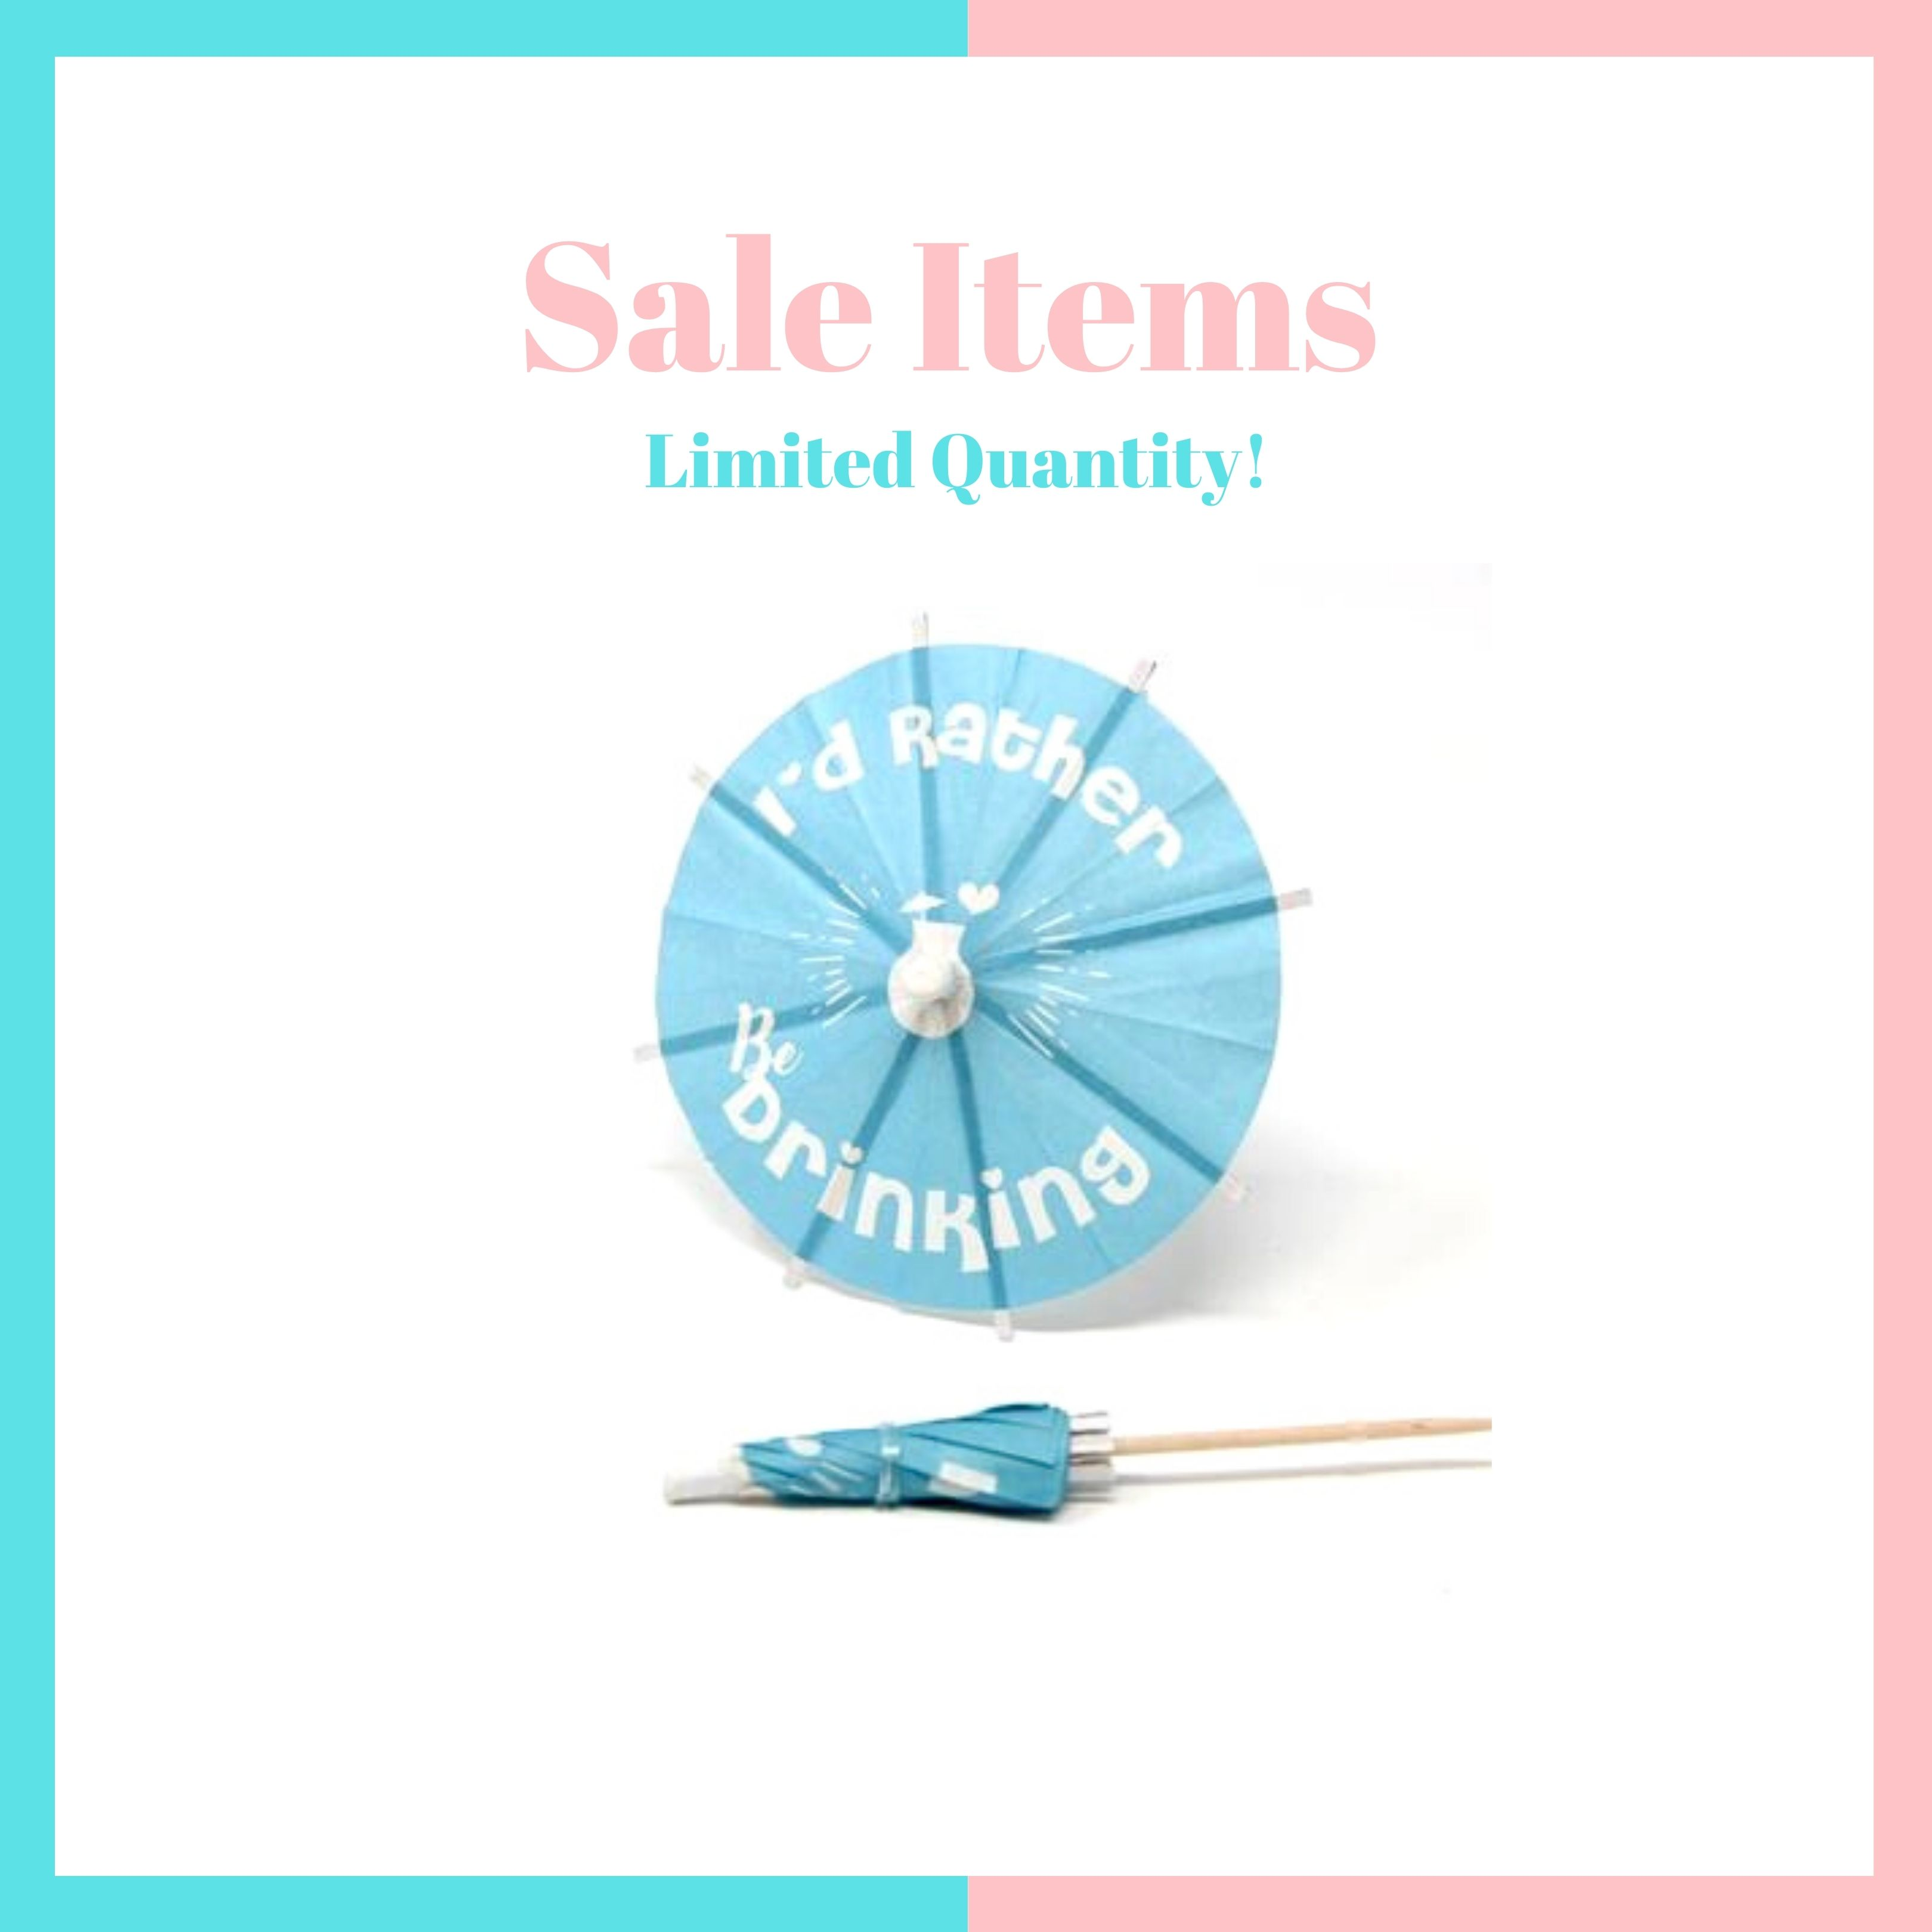 SALE ITEMS - Limited Quantities